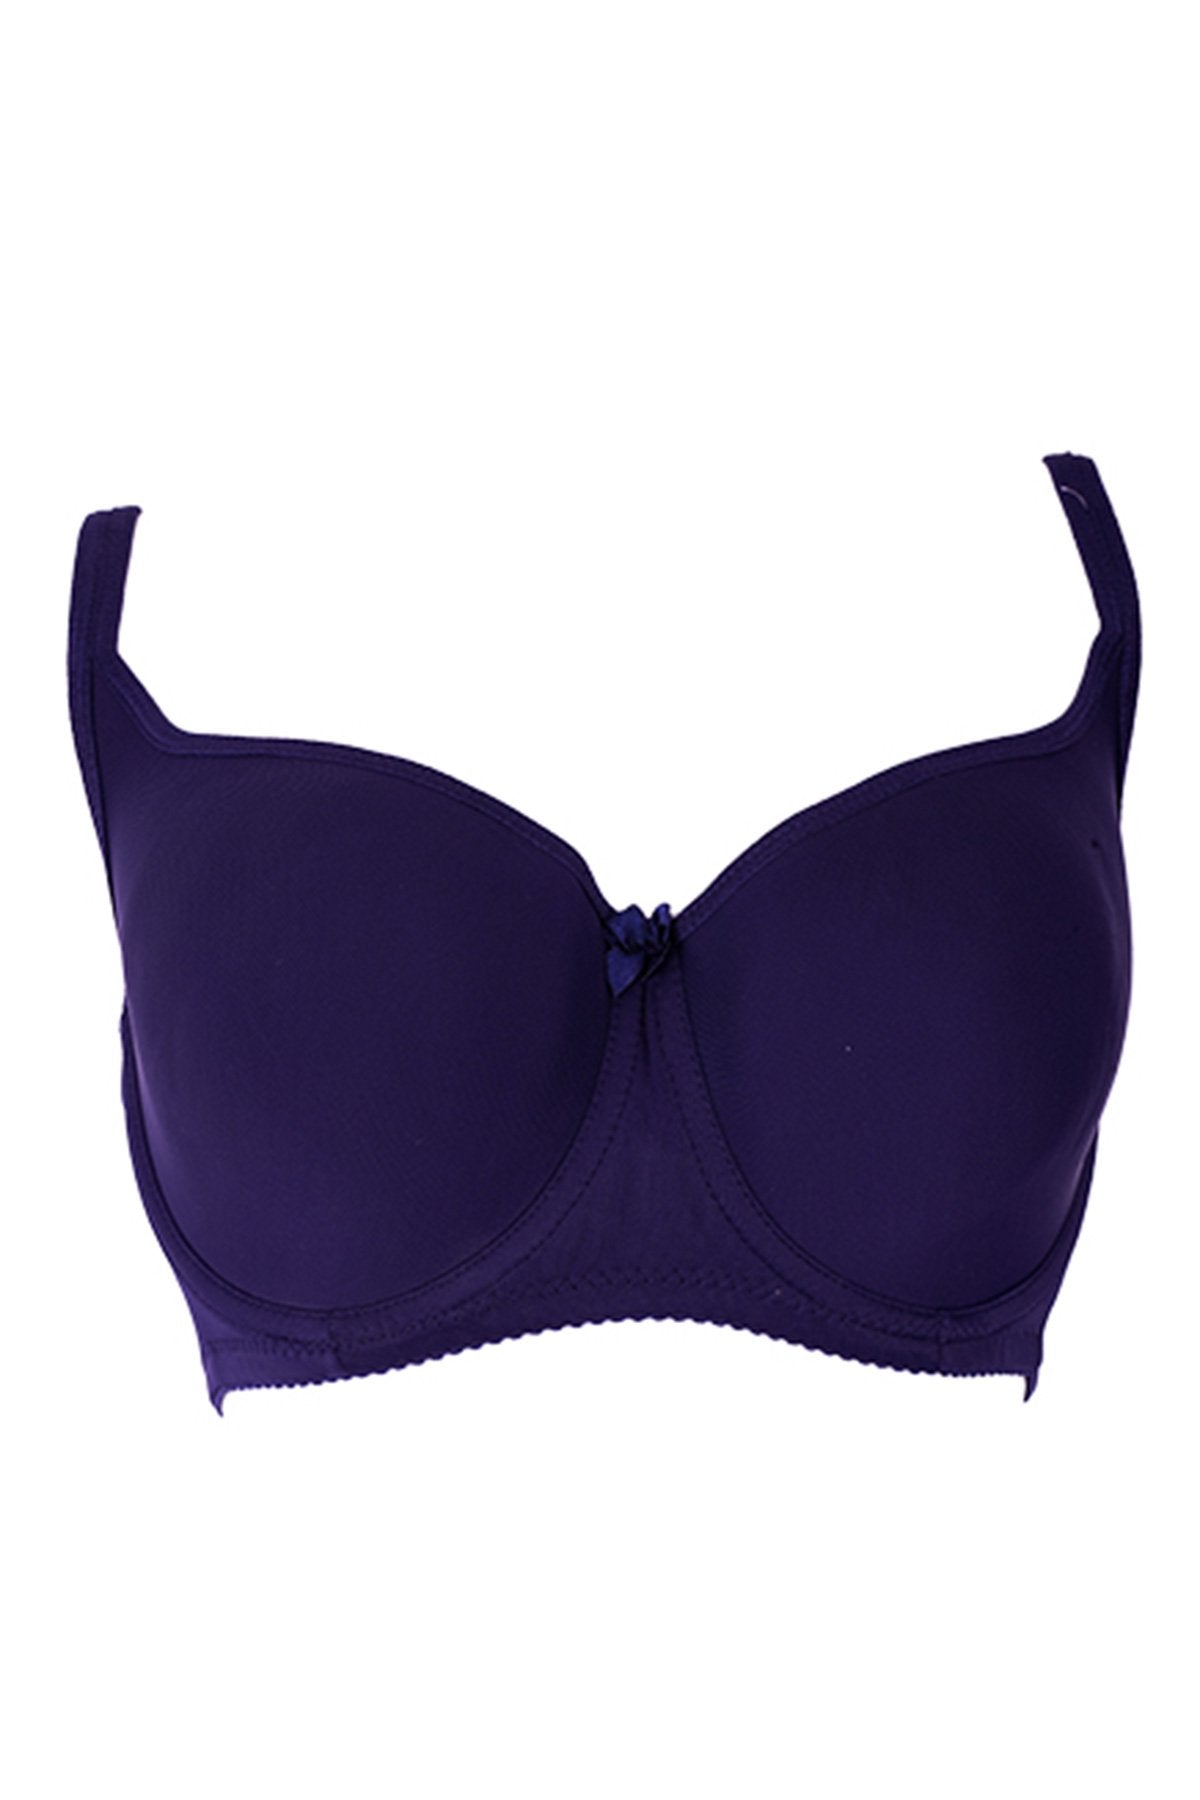 BLS - Barbola Wired And Padded Bra - Navy Blue